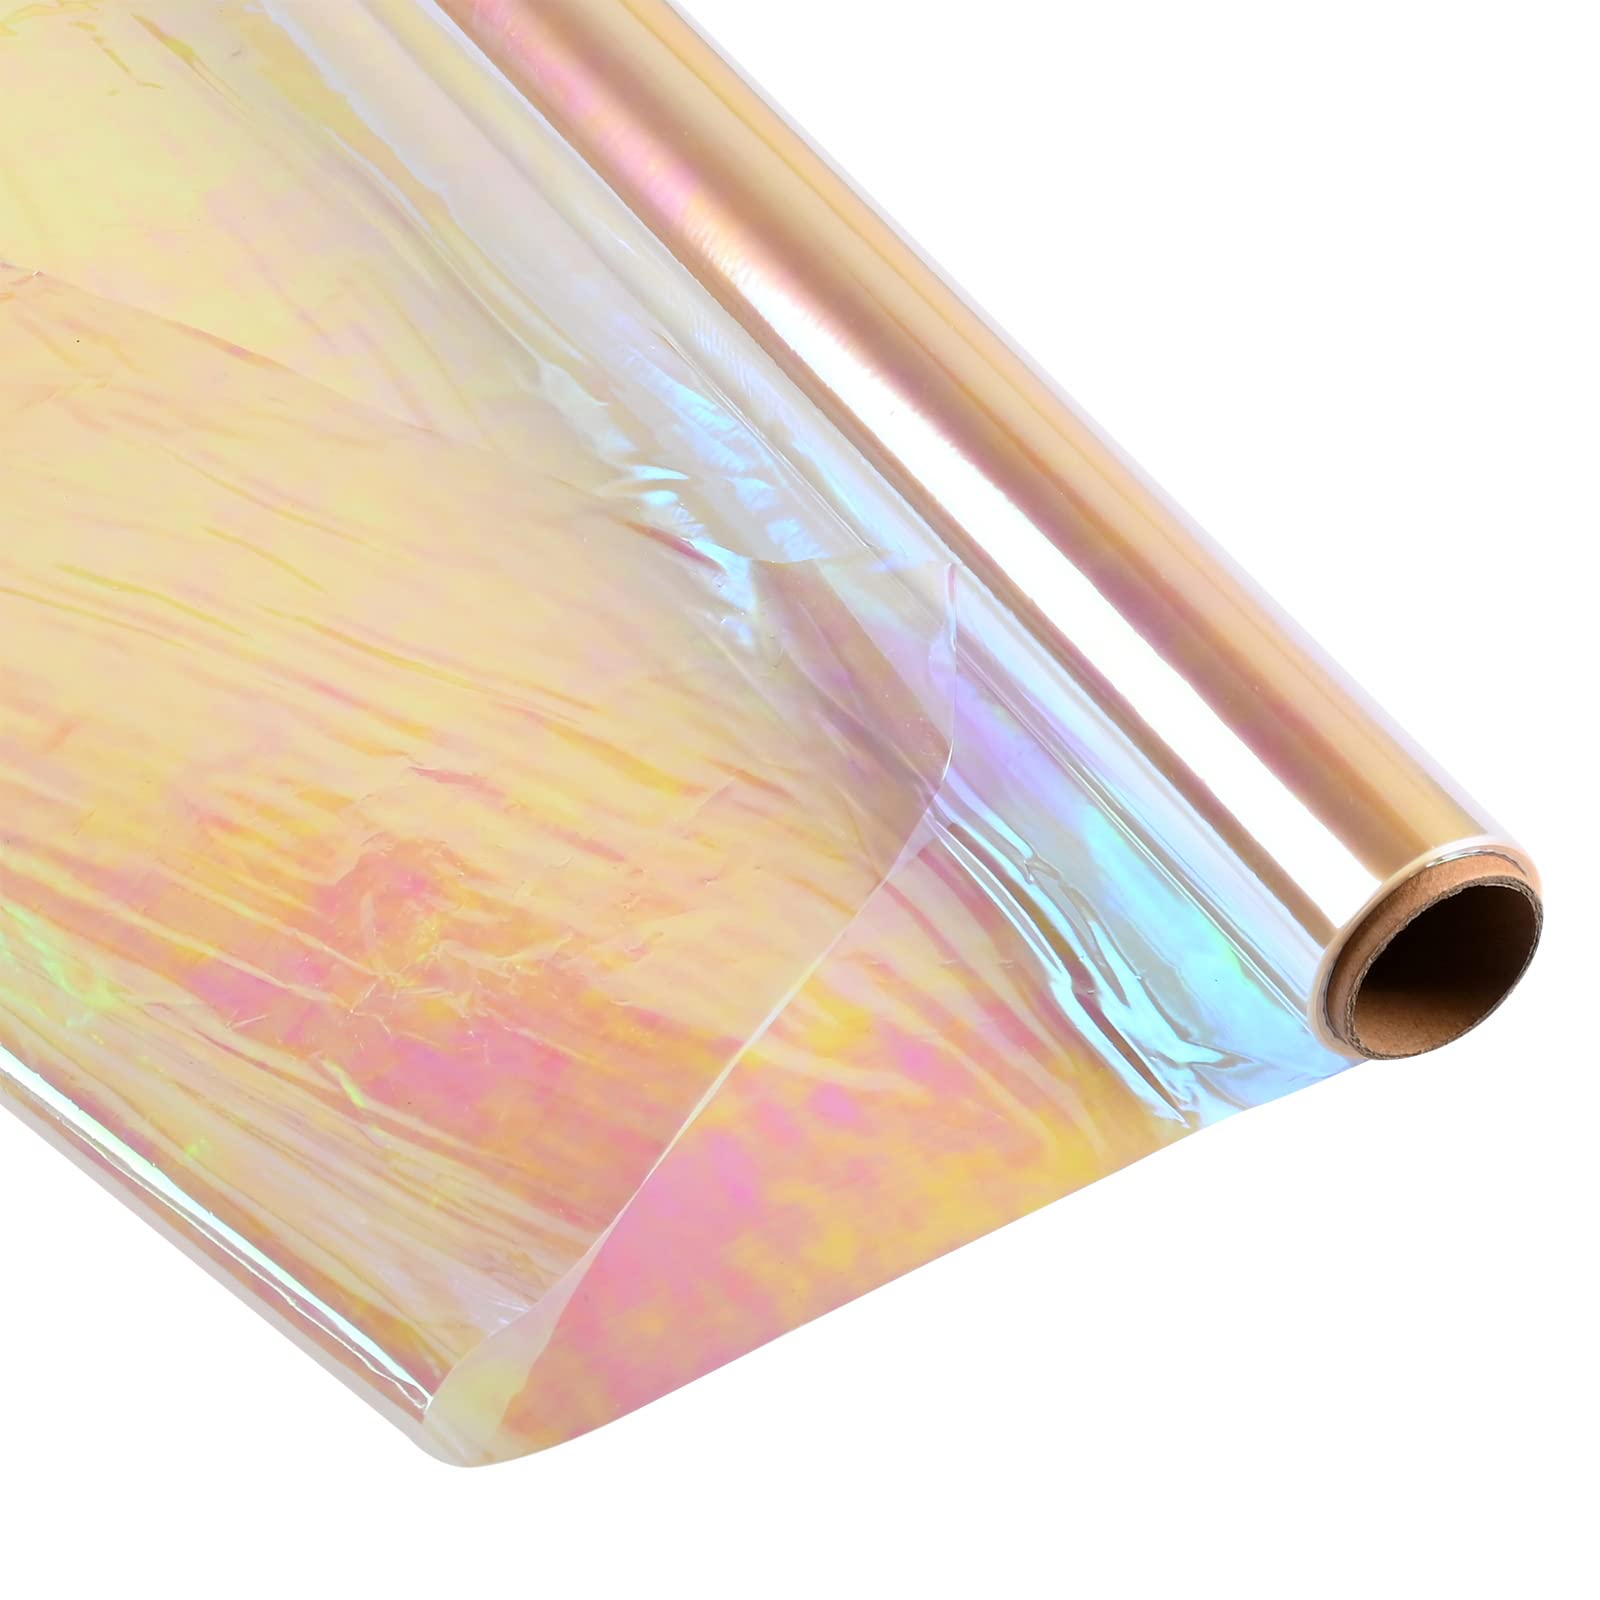 Giiffu Iridescent Film Cellophane Wrap Roll I 34 In Wide X 50 Ft Long I for  Gift Baskets Flower Wrapping Paper Holographic Cellophane Easter Wrap Roll  for Easter Gift Floral Bouquet Wrapping